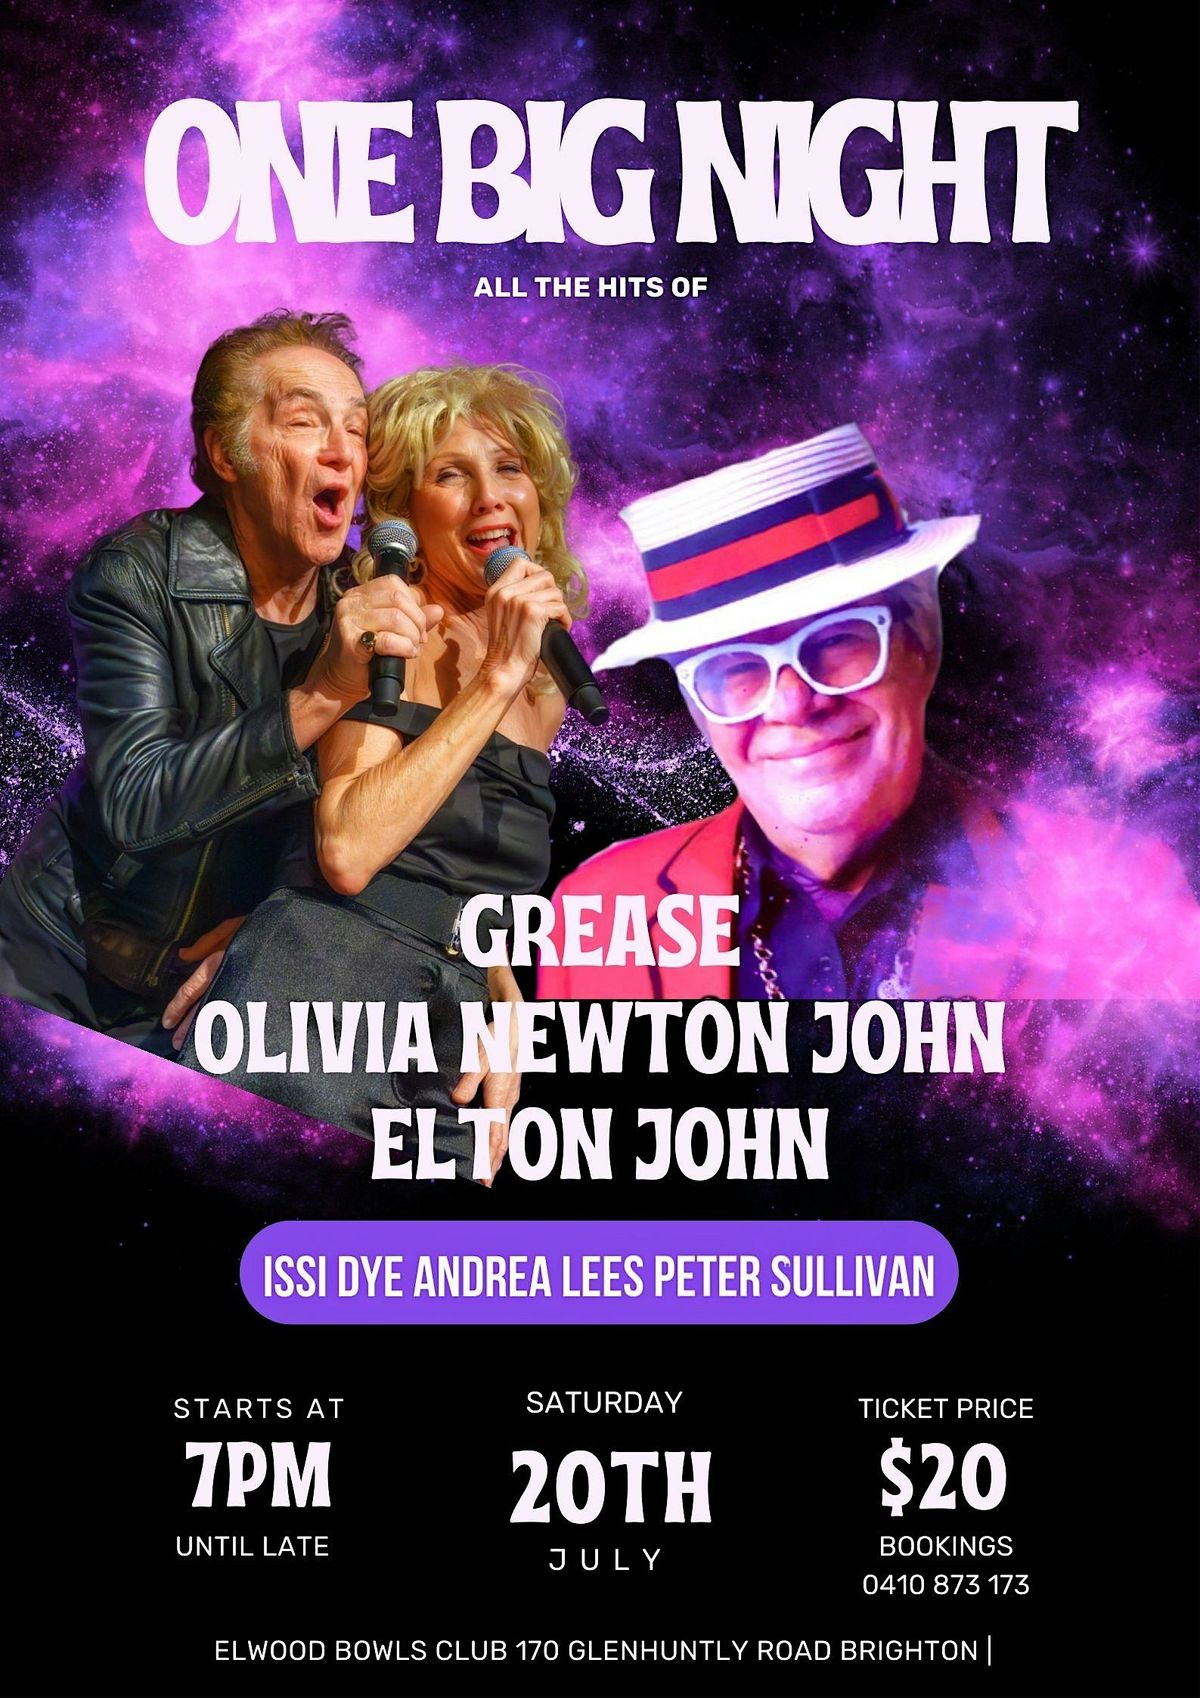 ONE BIG NIGHT: Grease and Elton John Tribute Show